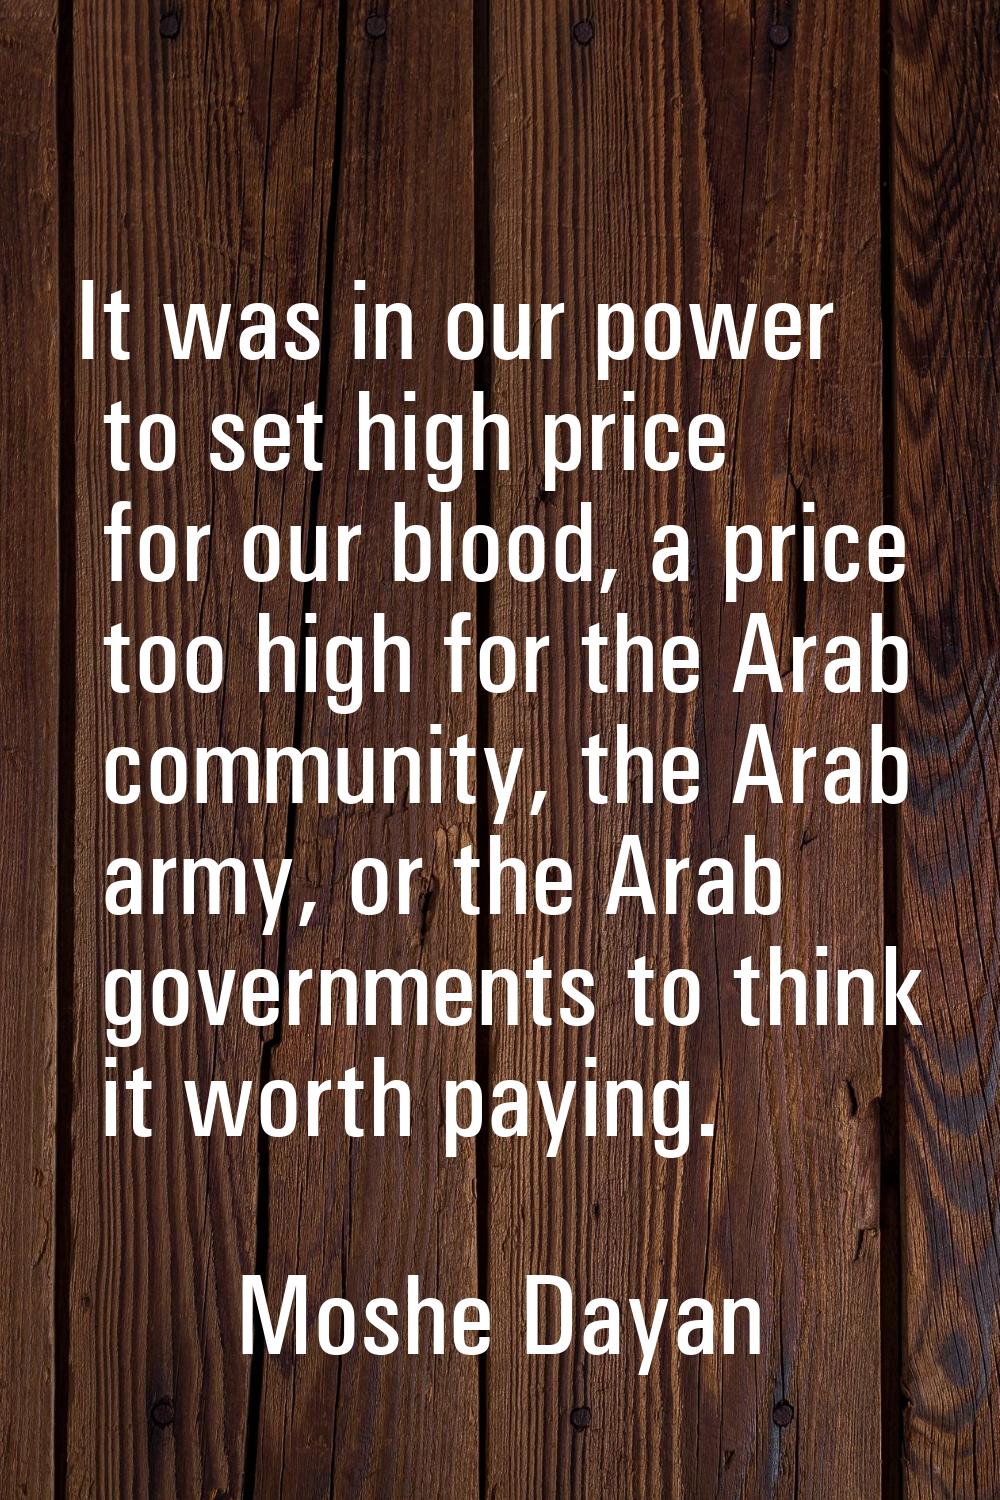 It was in our power to set high price for our blood, a price too high for the Arab community, the A